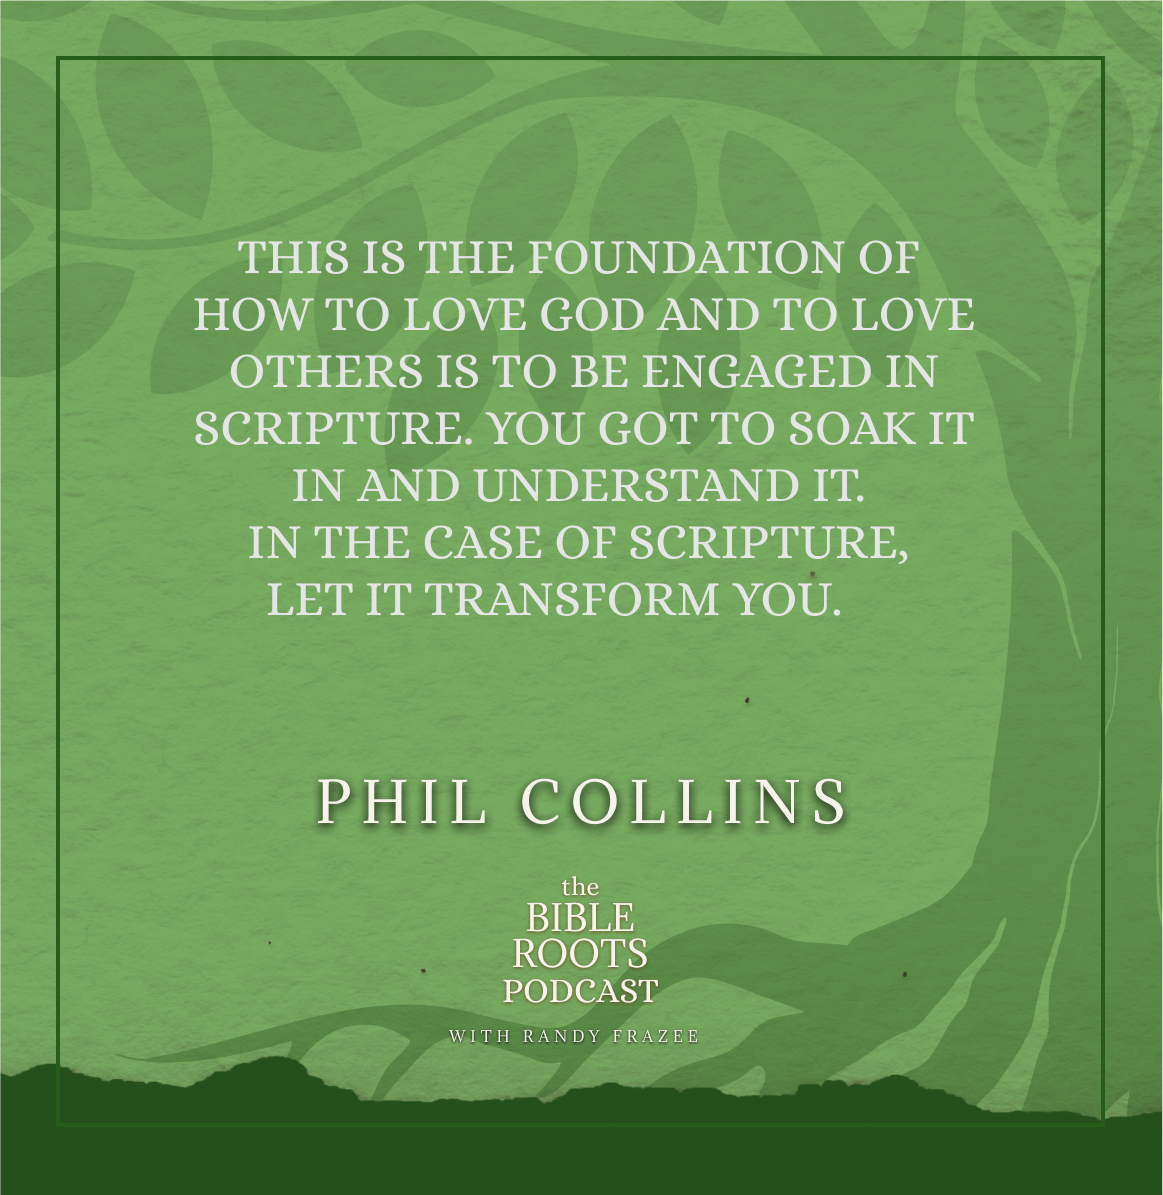 "This is the foundation of how to love God and to love others is to be engaged in scripture. You've got to soak it in and understand it. In the case of scripture, let it transform you." Phil Collins Quote